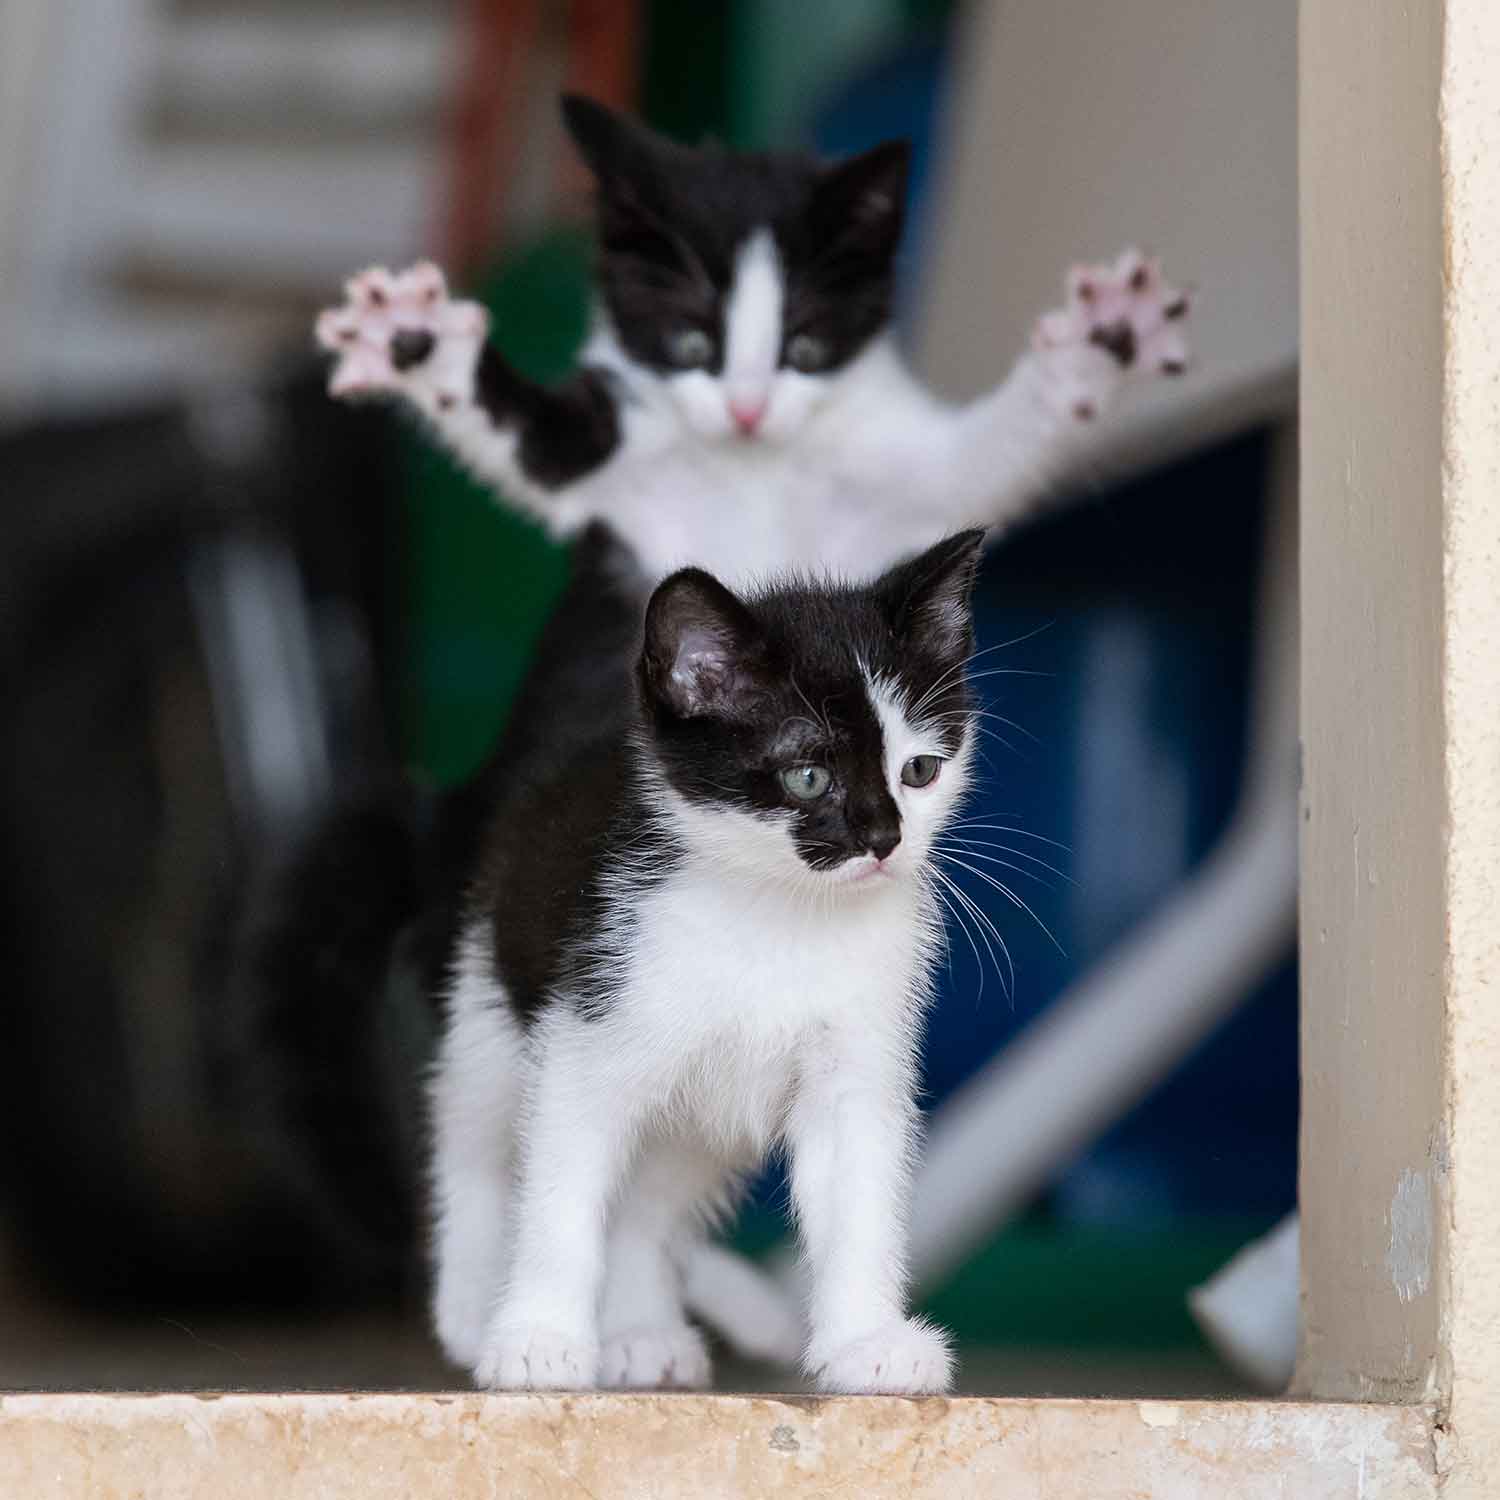 A black and white kitten looks out a window as another kitten hovers behind with its front paws outstretched.